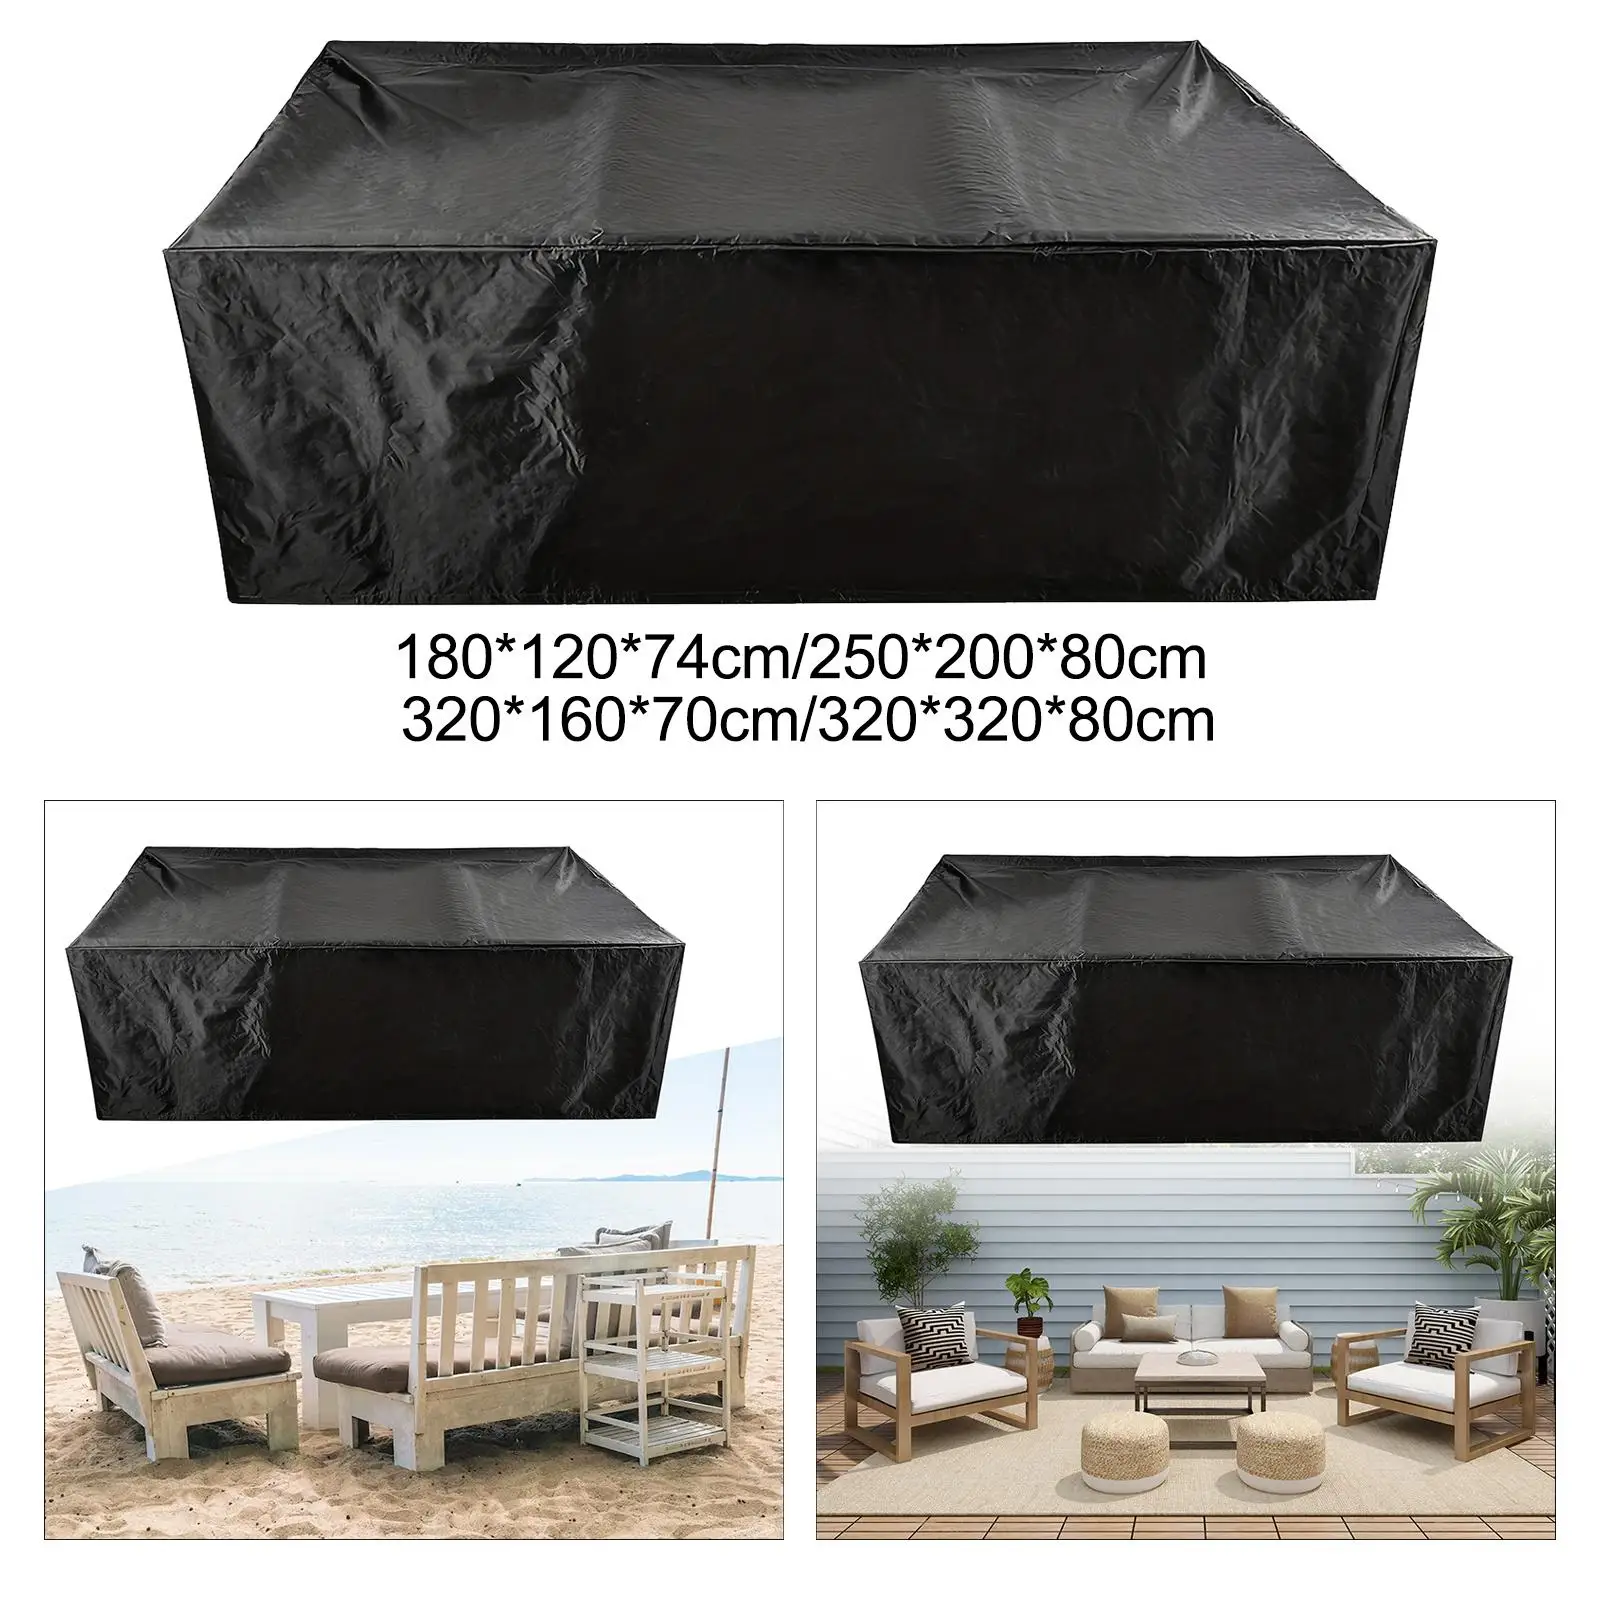 Patio Furniture Covers Outdoor Furniture Covers Dining Set Cover for Wicker Chairs Lounge Chair Swivel Chairs Table Furniture